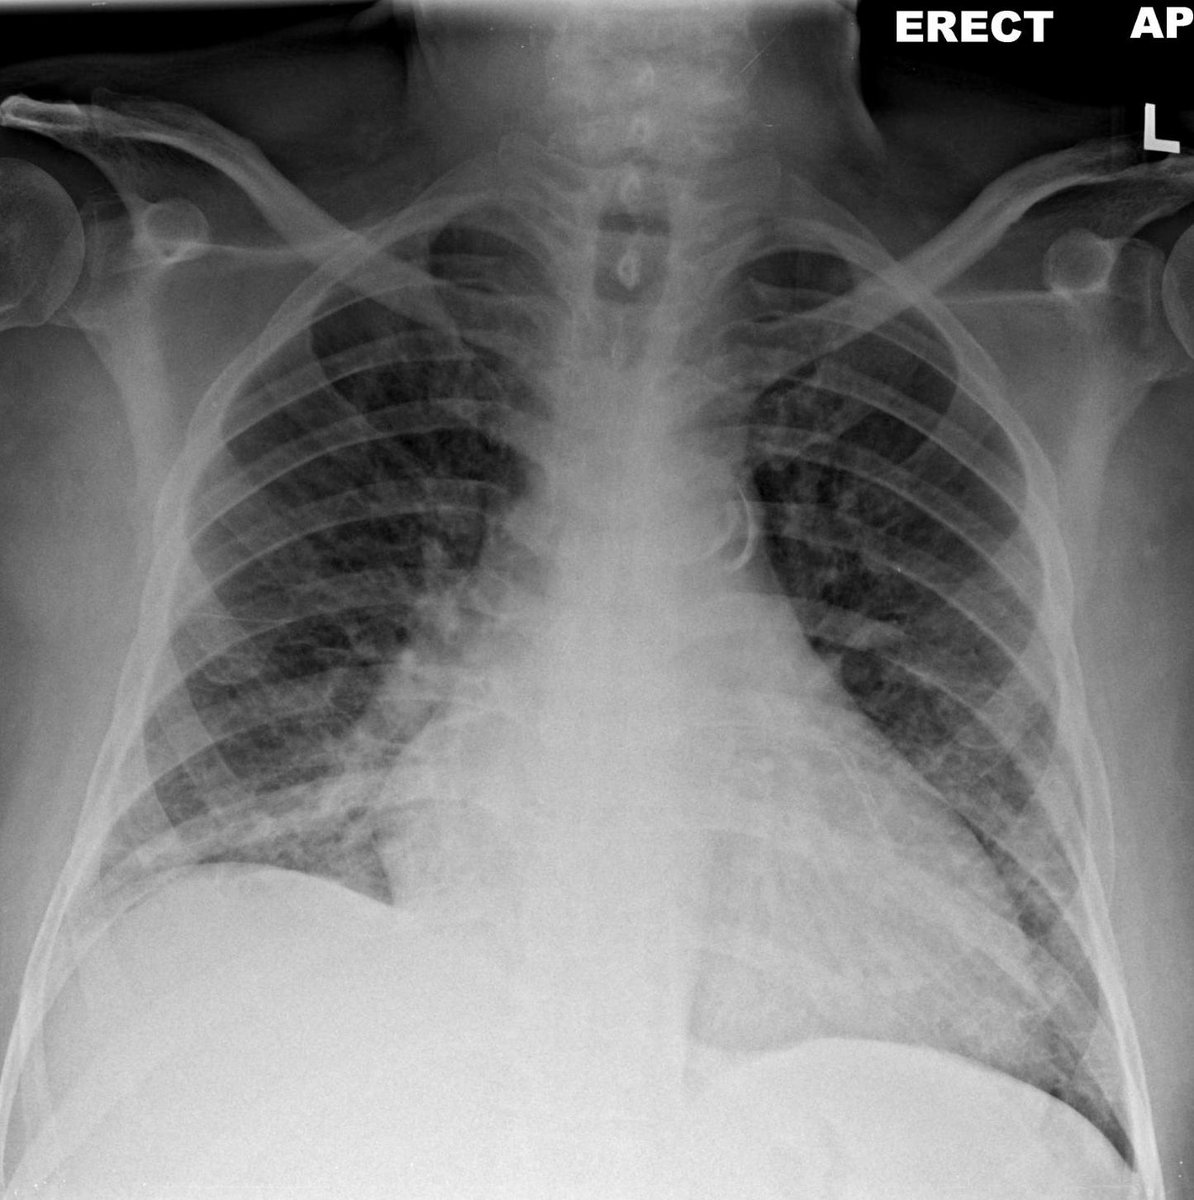 It's time for the weekly radiology image challenge! Case study: A 59-year-old man is experiencing breathlessness at rest. What is the most likely cause for these appearances? Head to the ERS Facebook to see the multiple choice answers & comment yours: facebook.com/EuropeanRespir…